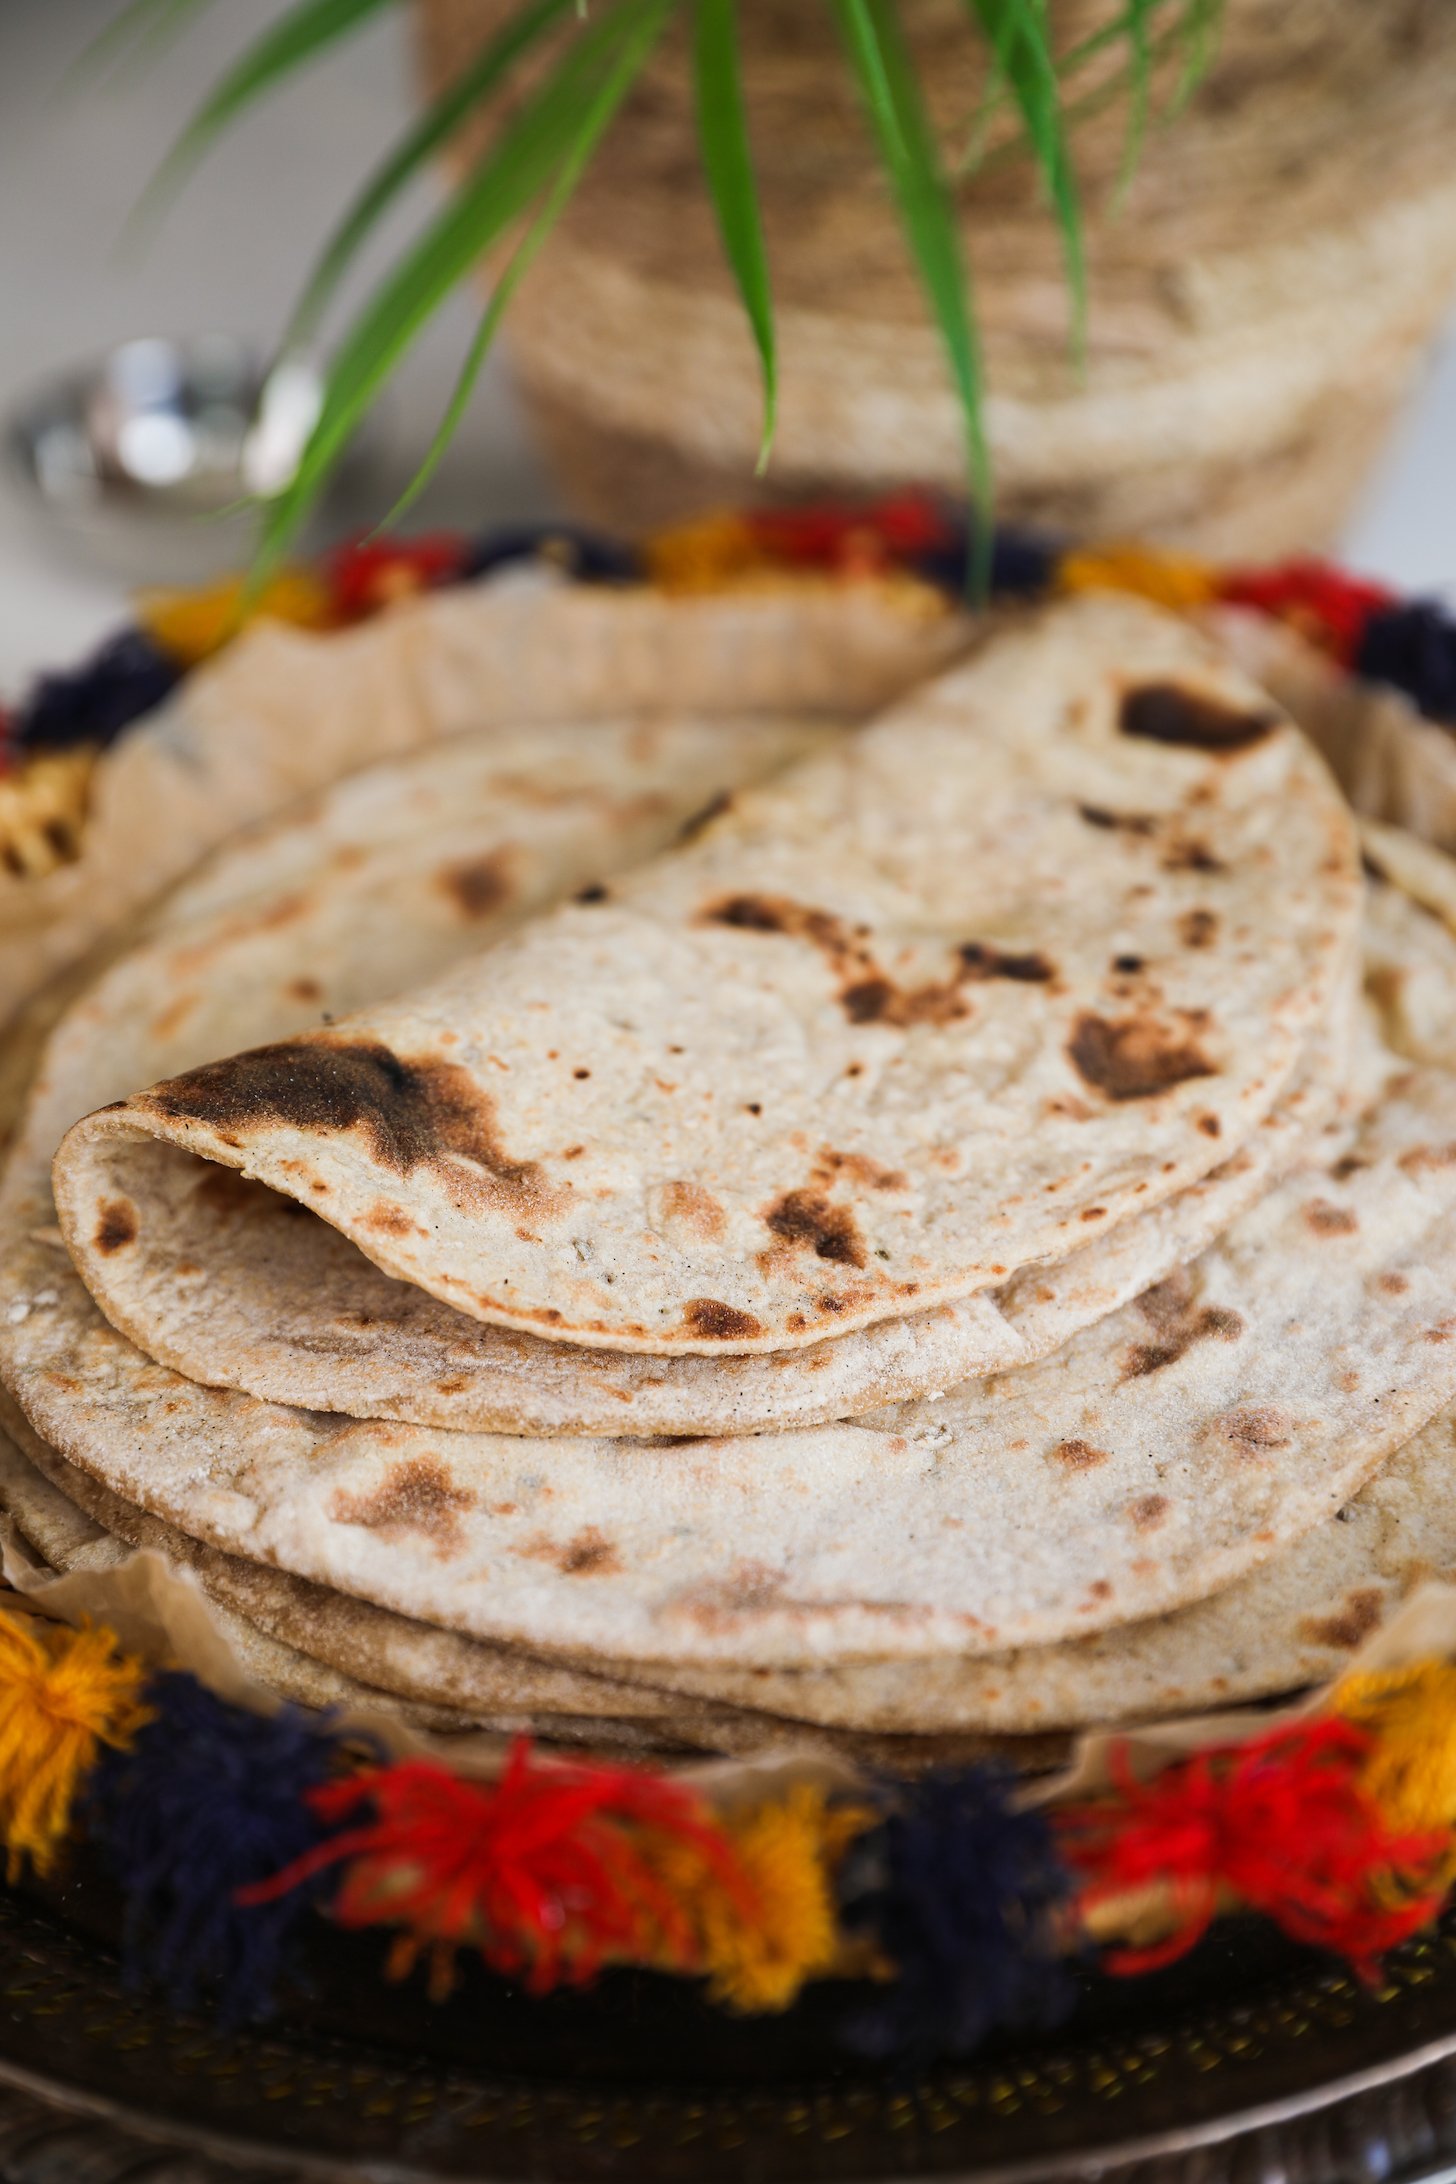 A perspective image of a folded roti on a pile of rotis on a decorative plate.